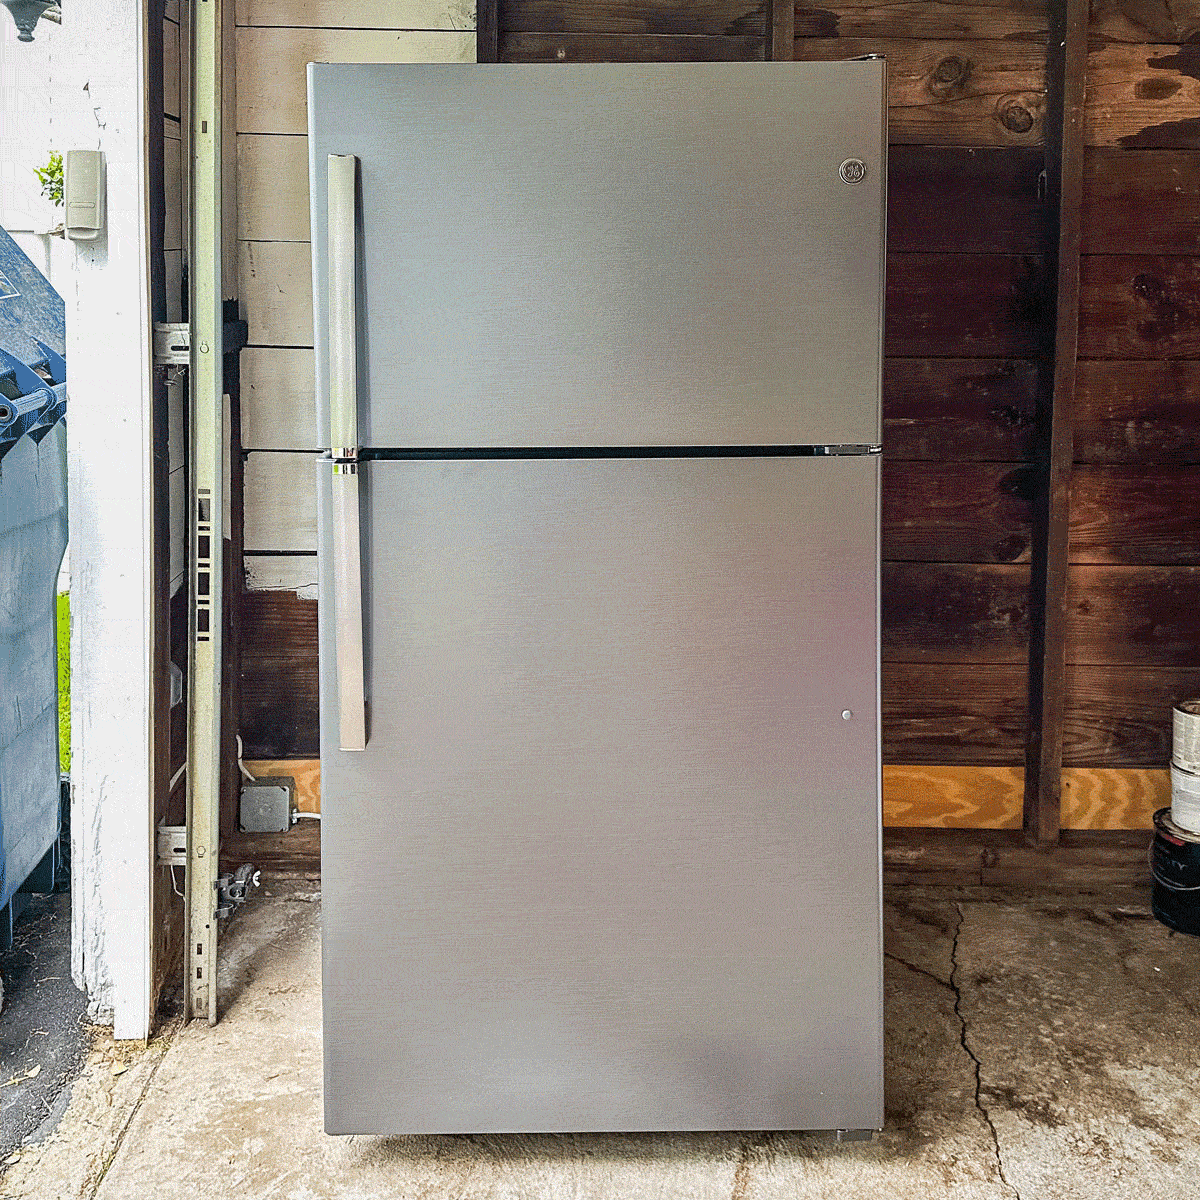 7 Best Garage Refrigerators for Extra Storage, Tested by Editors